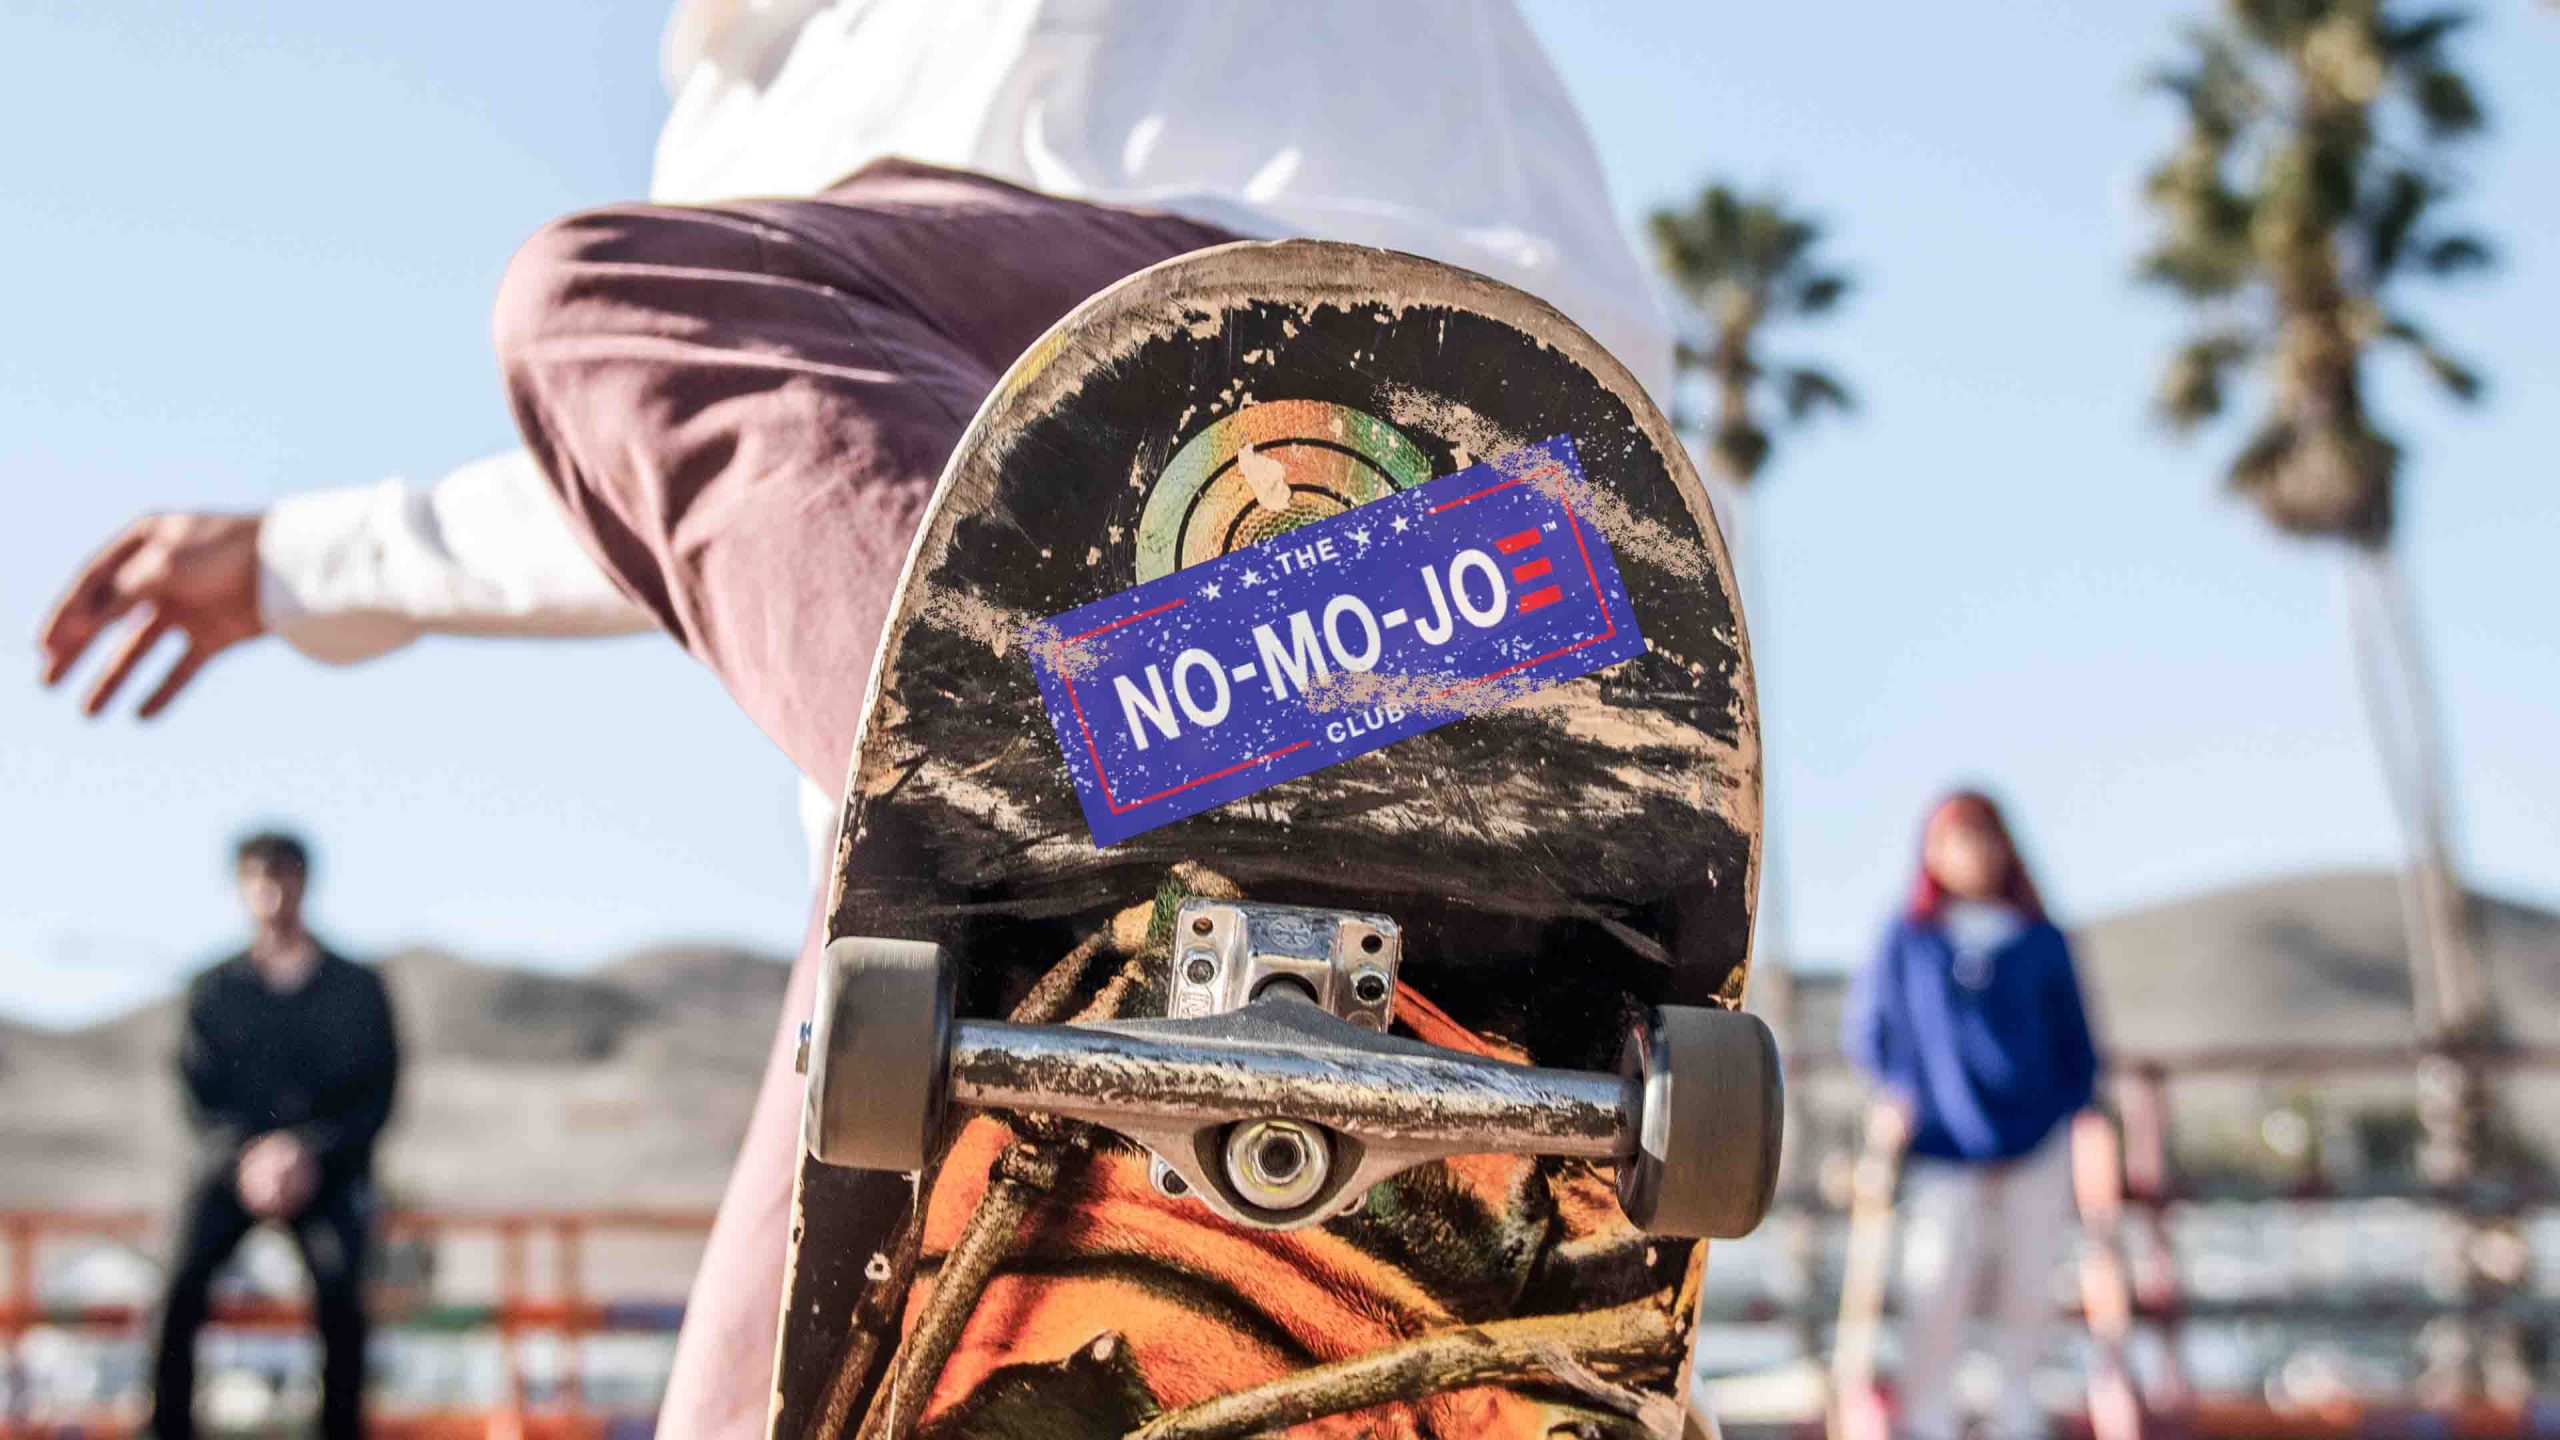 The No-Mo-Joe Club™ sticker on the bottom of skateboard during trick with palm trees in background.